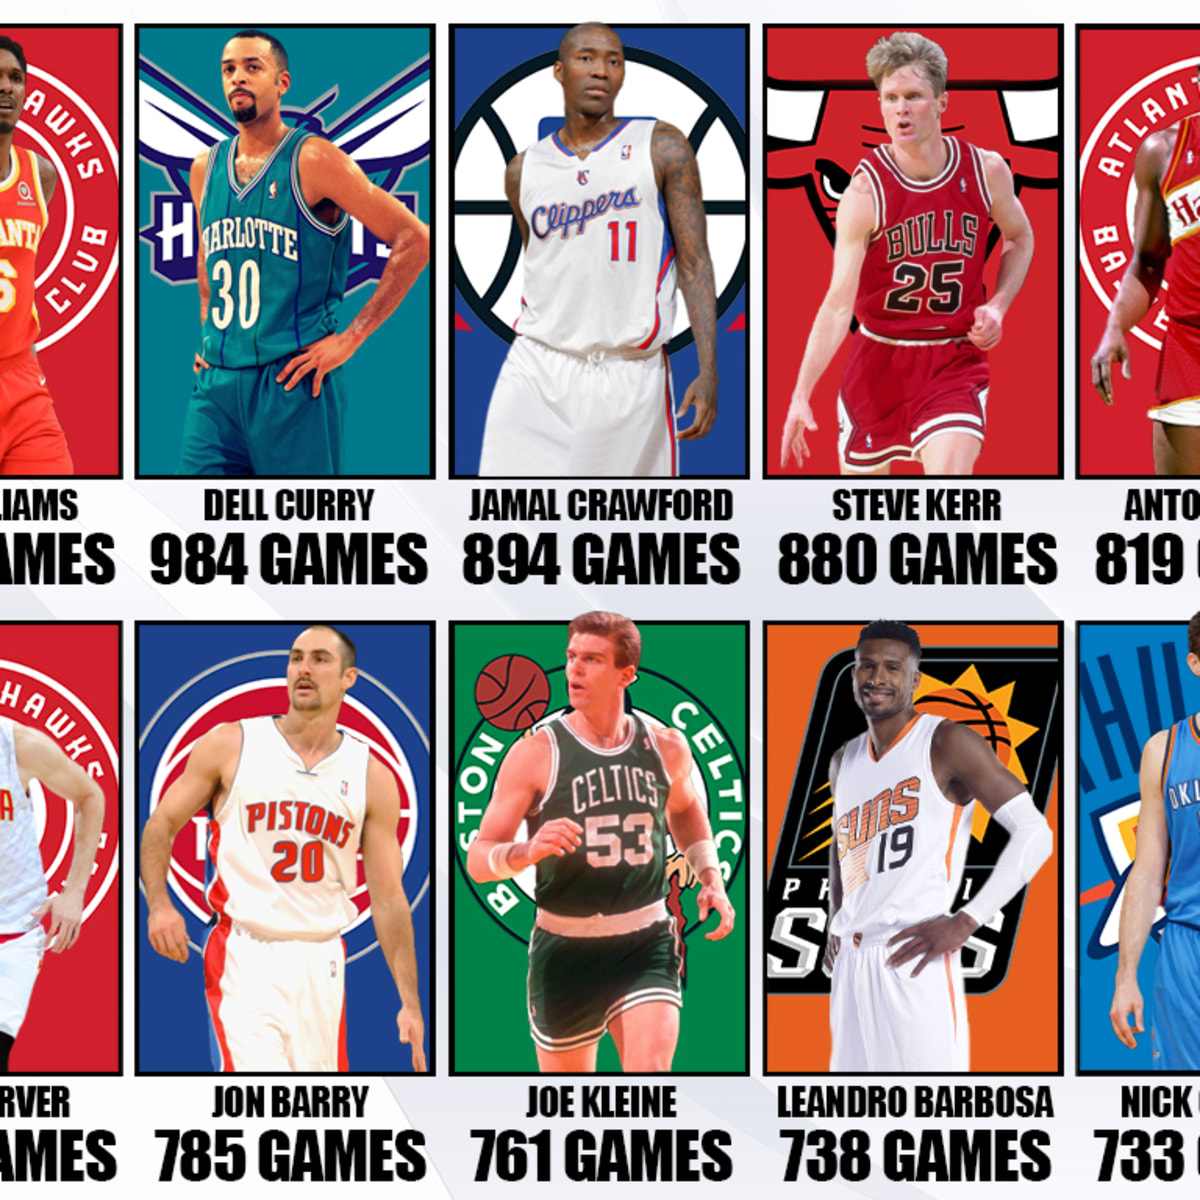 10 NBA Players With The Most Appearances Off The Bench: Lou